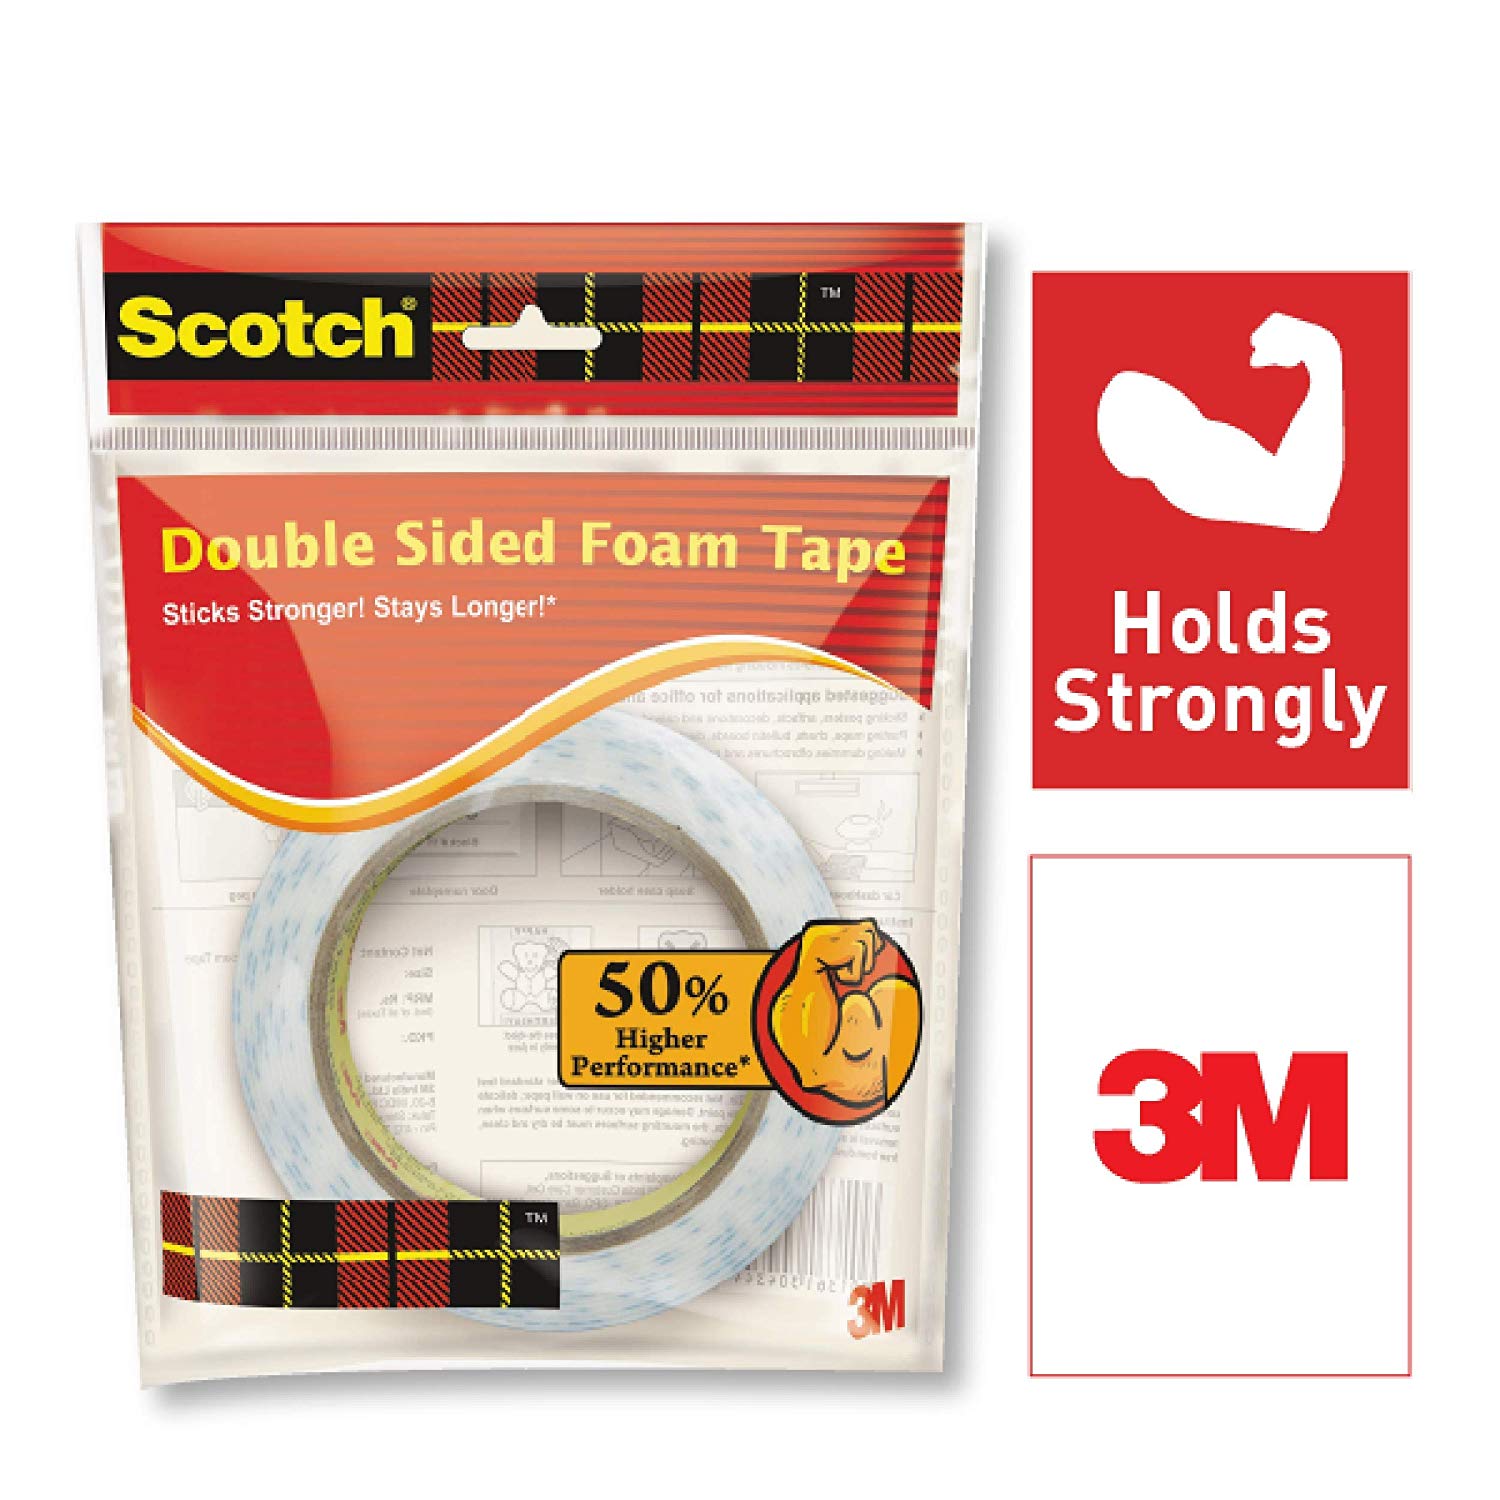 double sided fabric tape scotch review